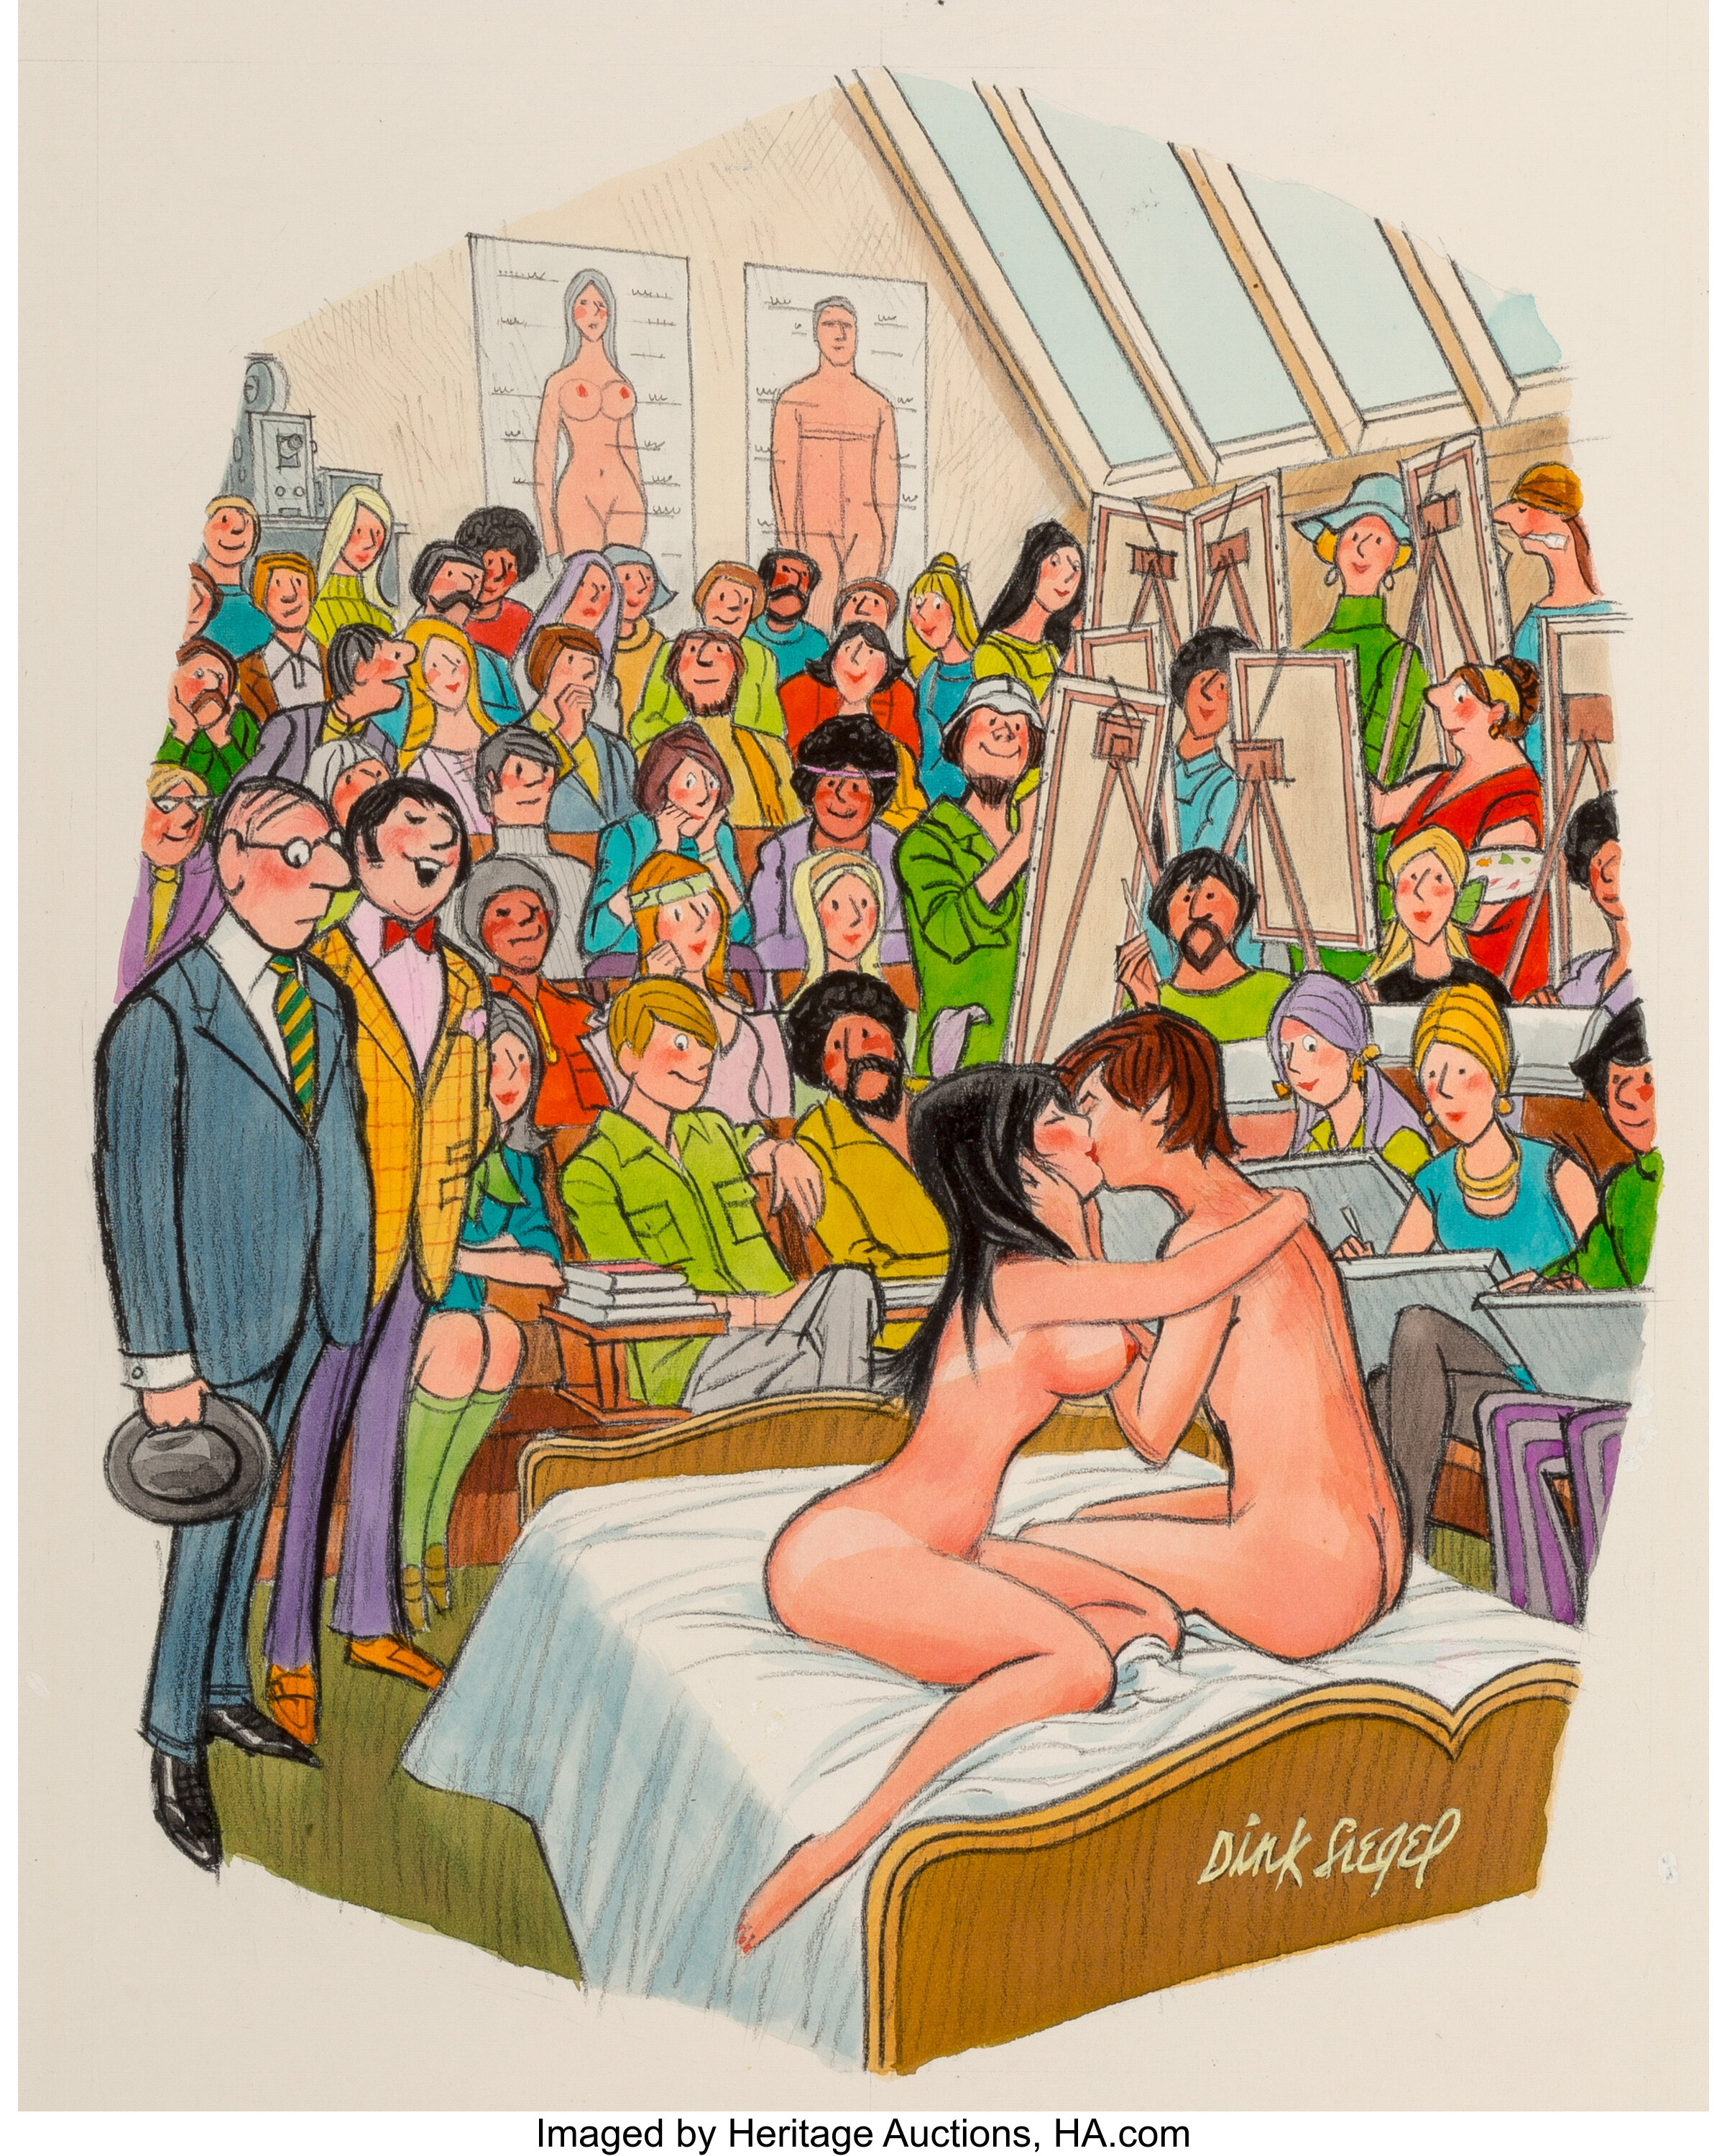 American Cartoon Porn With Captions - Dink Siegel (American, 1910-2003). Sex Ed, Playboy cartoon, April | Lot  #71151 | Heritage Auctions